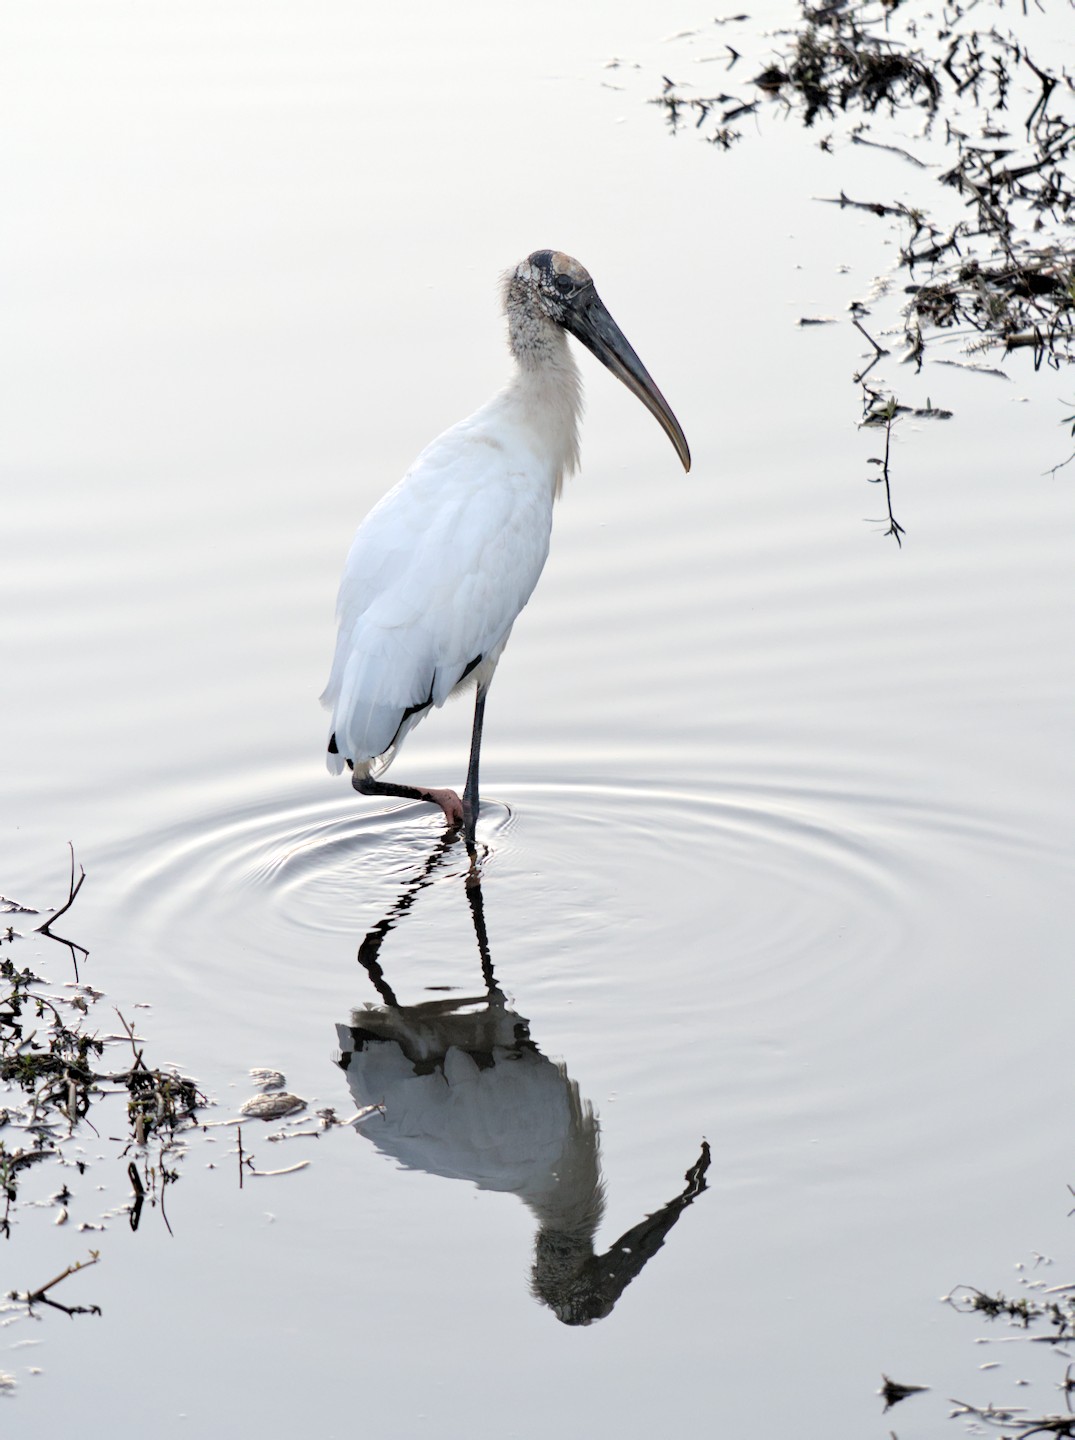 A wood stork stands in the water, one leg bent, with a slightly rippled reflection